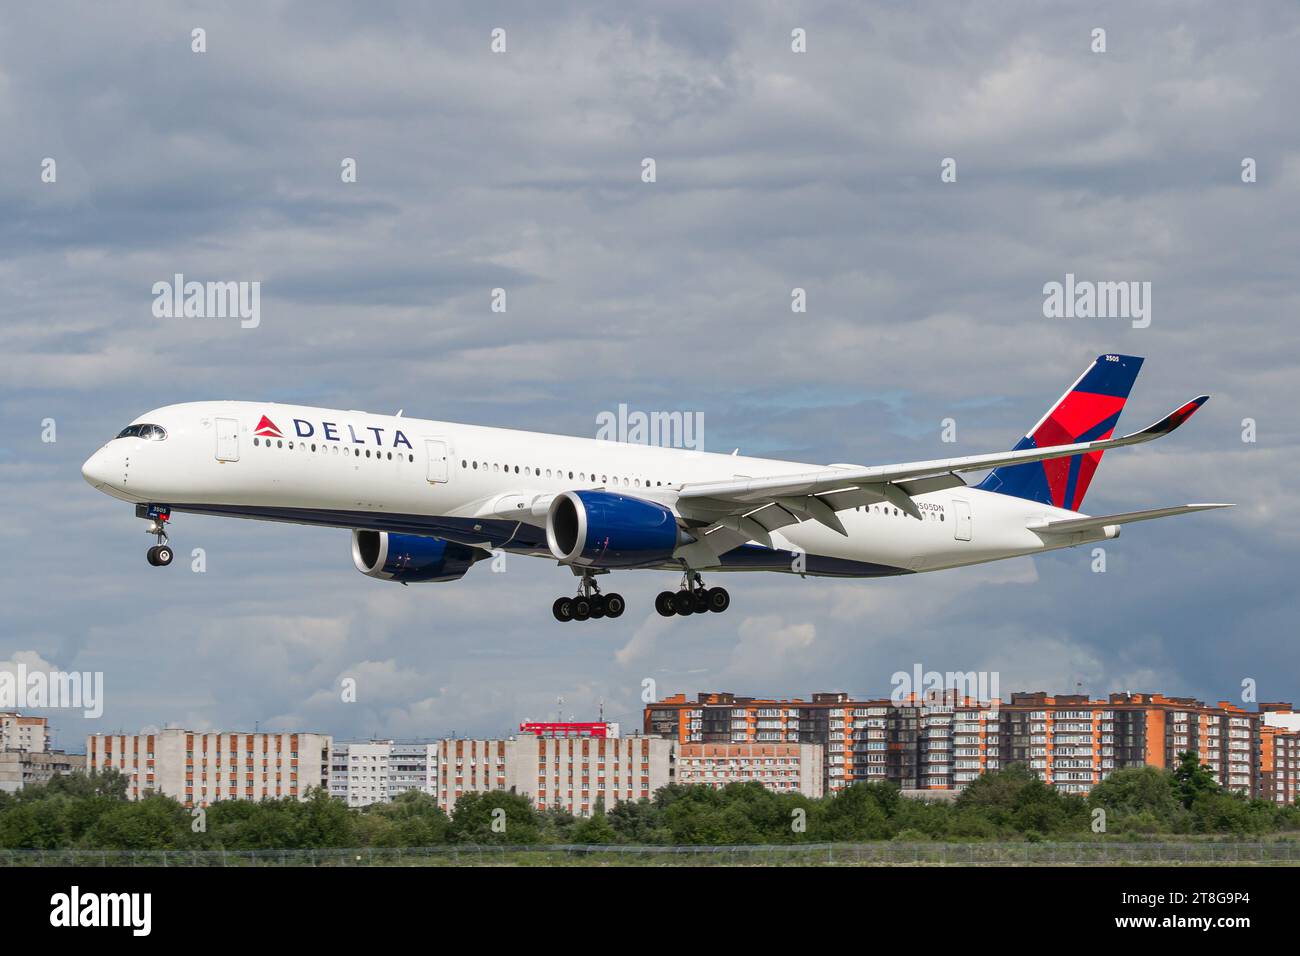 Delta Airlines Airbus A350-900 aircraft landing in Lviv. This was the first visit of A350 to Lviv Airport. High-quality photo Stock Photo